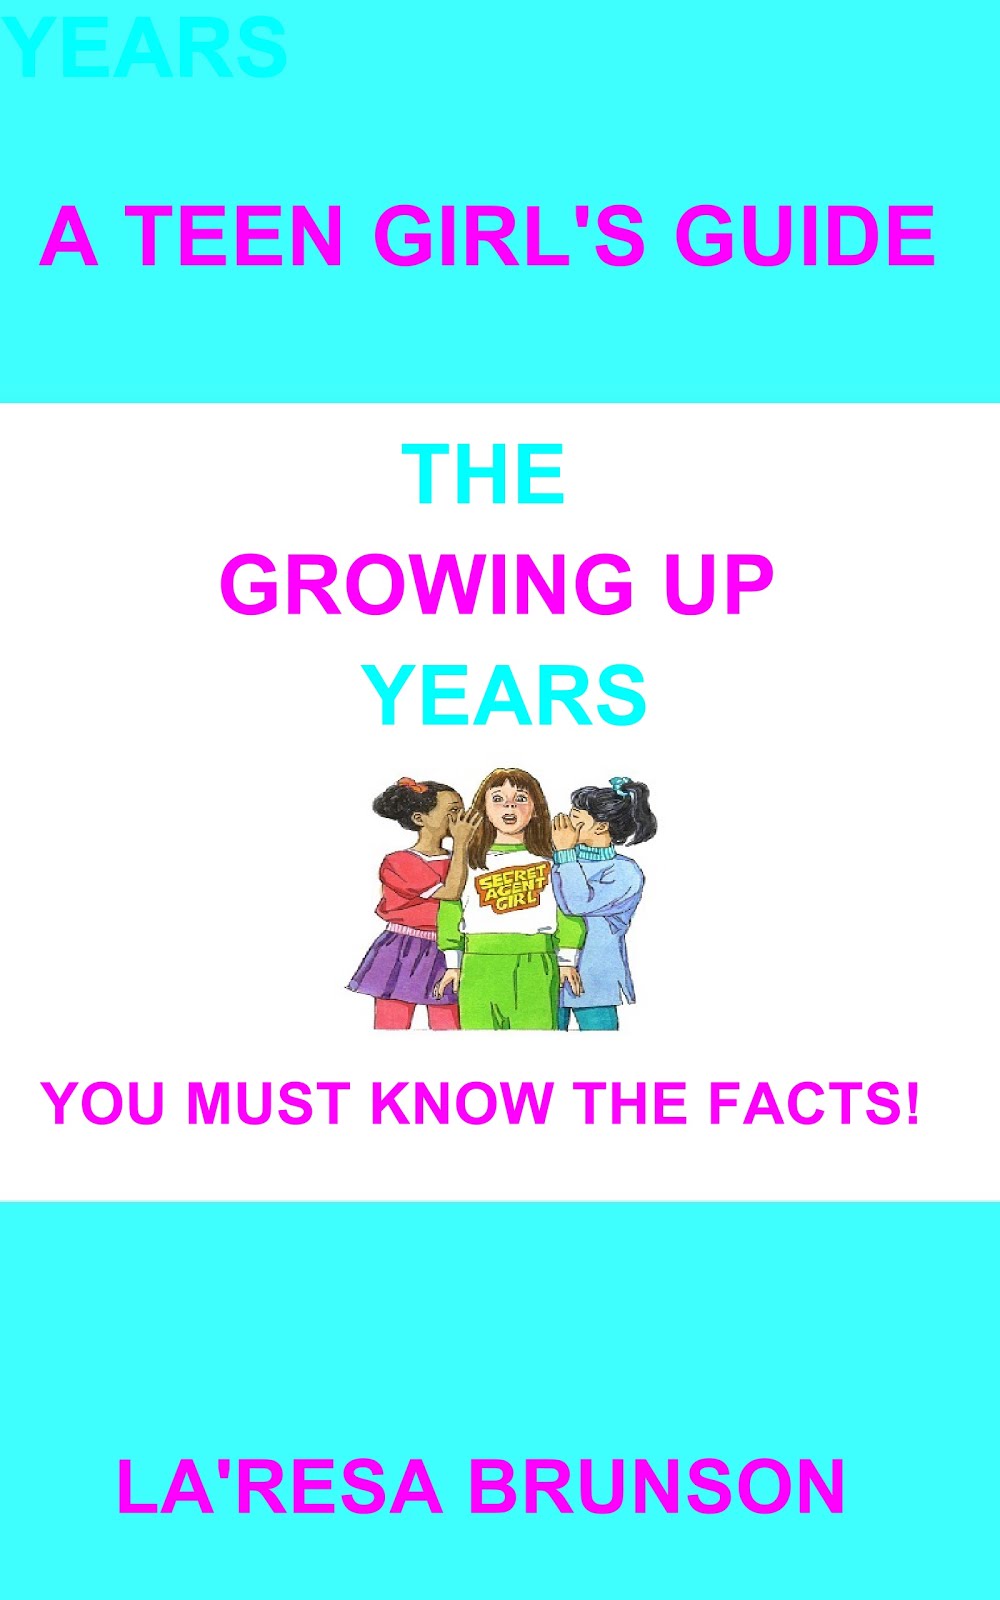 A Teen Girl's Guide: The Growing Up Years